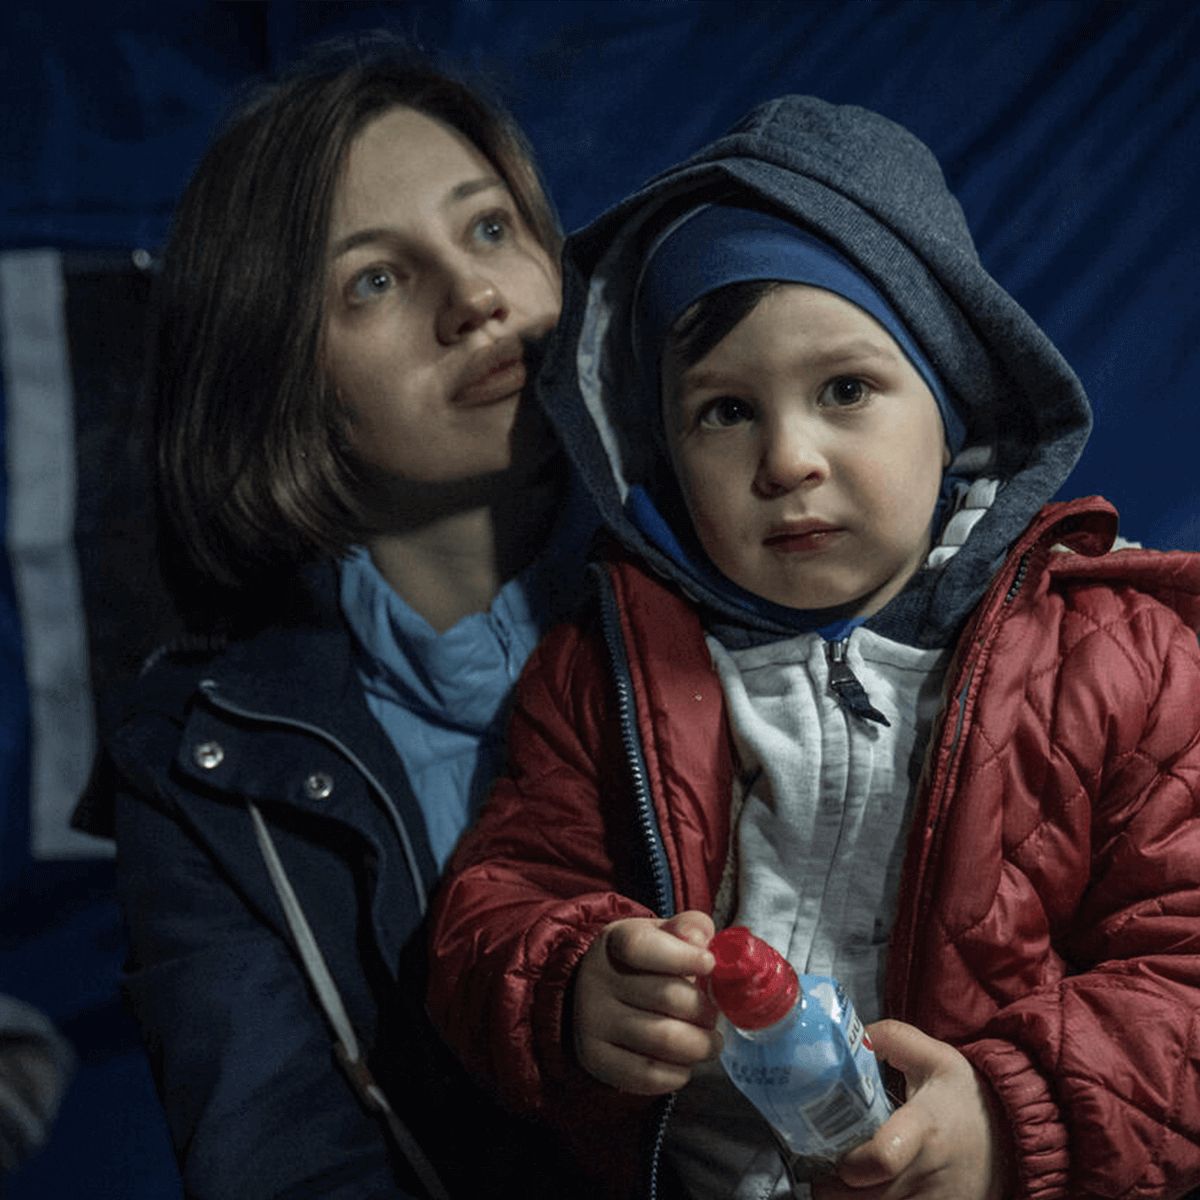 Xenia and her two year old son Marc flee Ukraine to seek safety in Romania